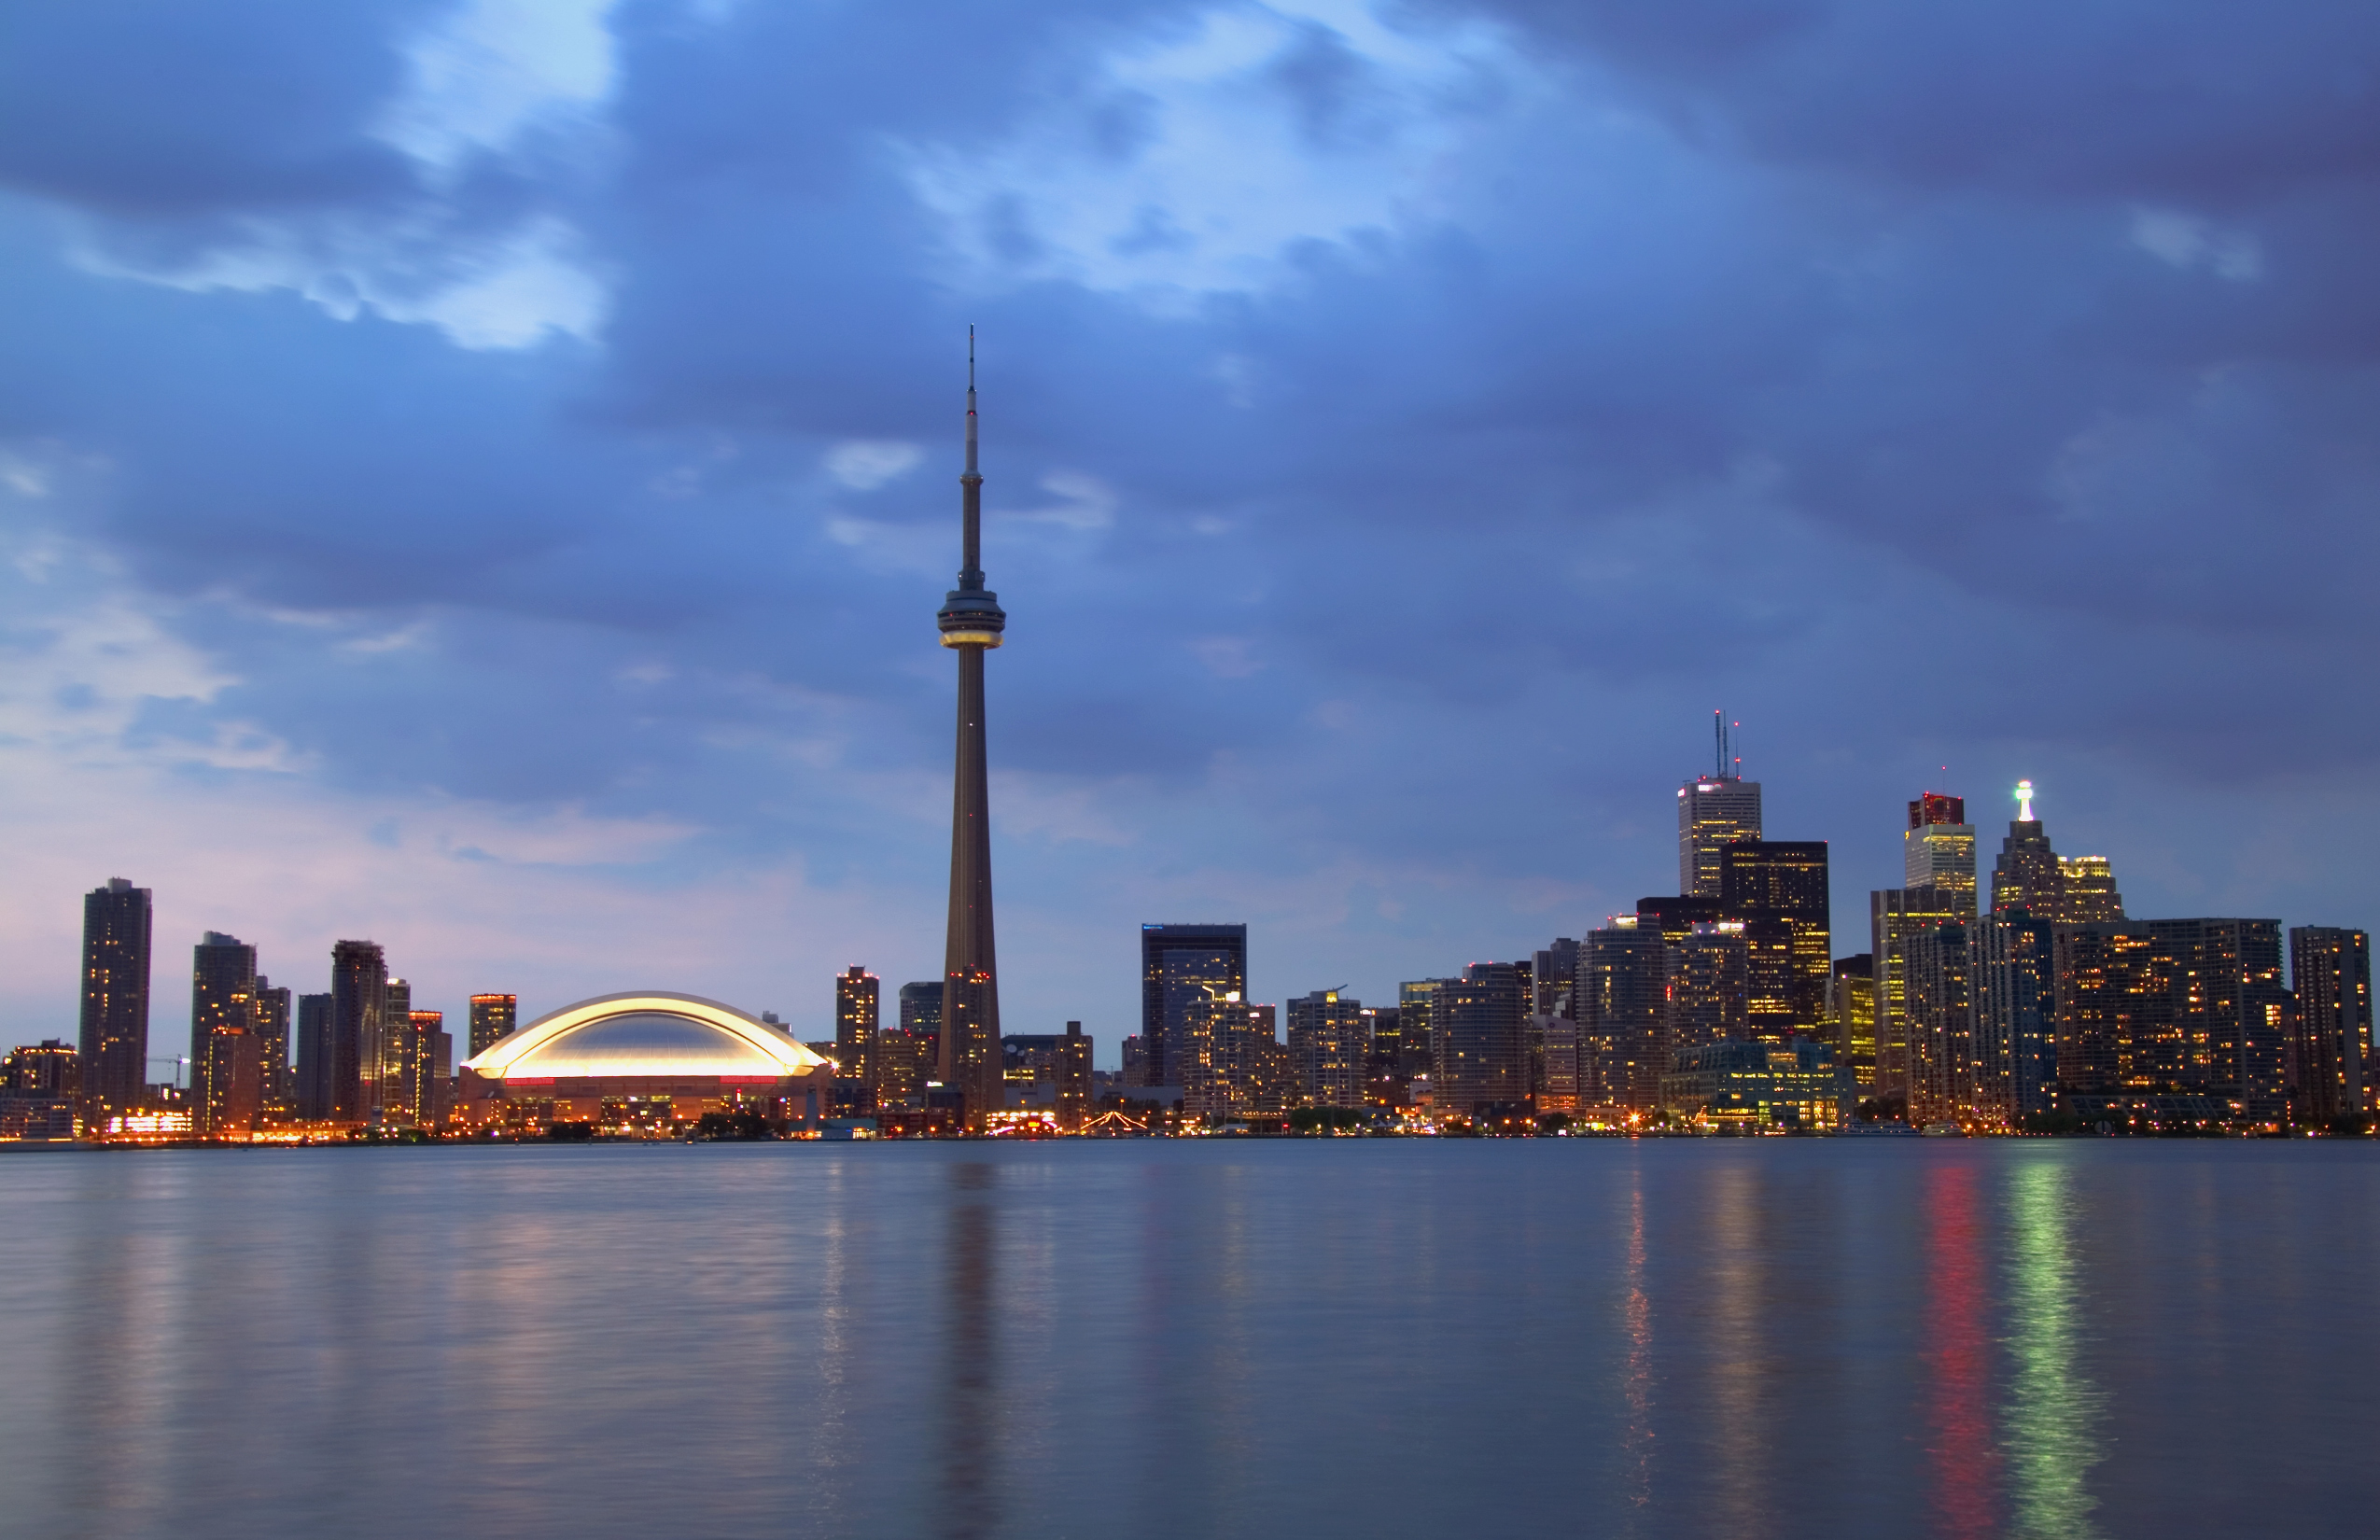 Toronto (above) is the world's most youth-friendly city, followed by Berlin and New York, reveals a new survey. Photo: Corbis.